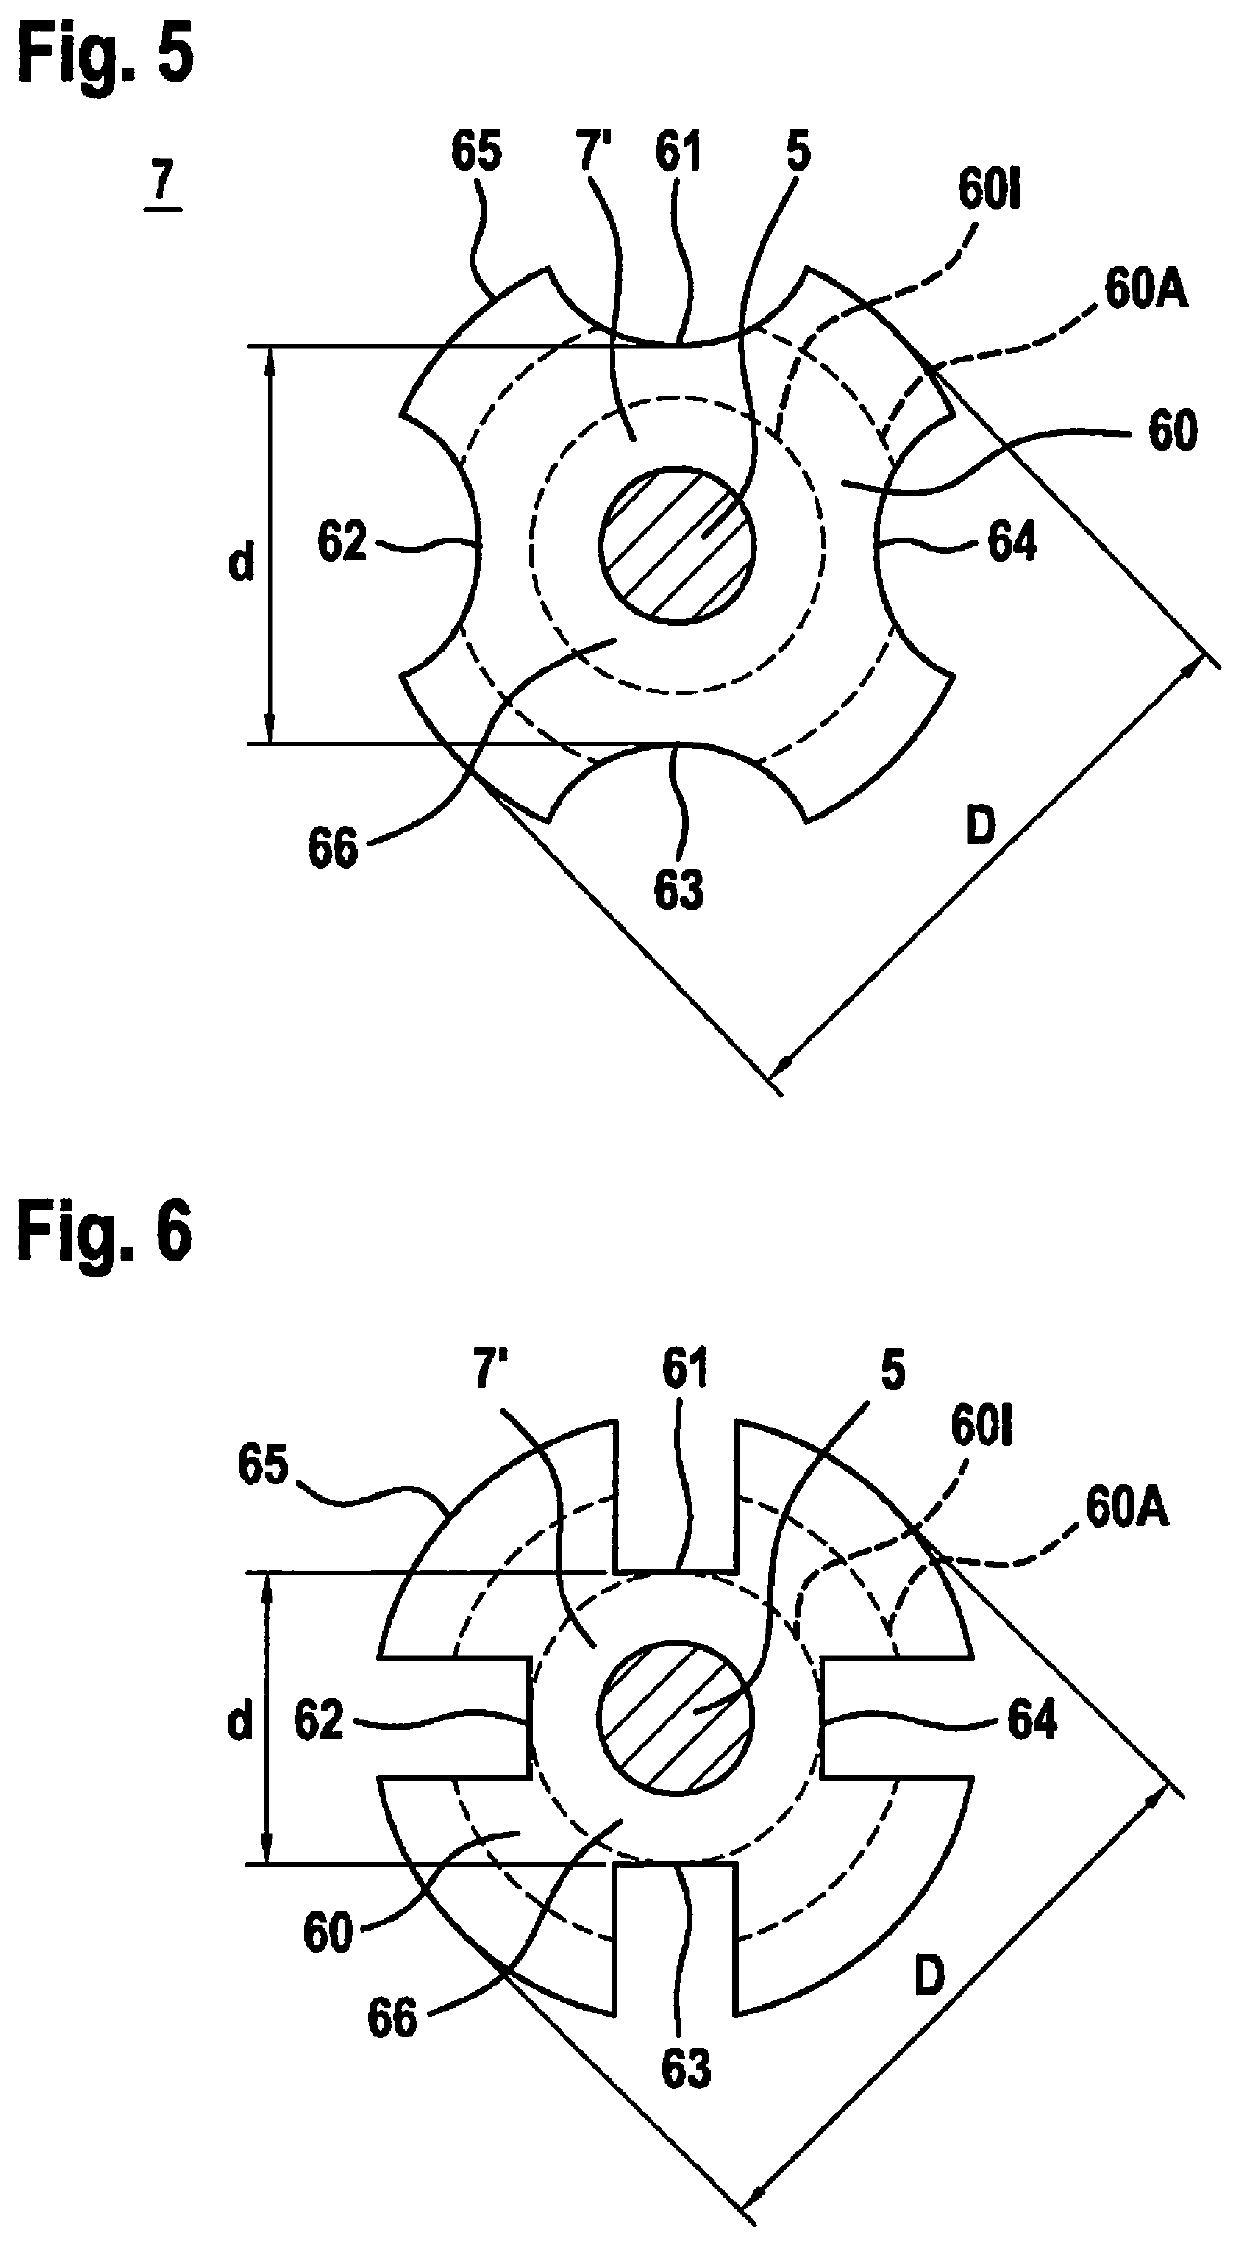 Valve for metering a fluid